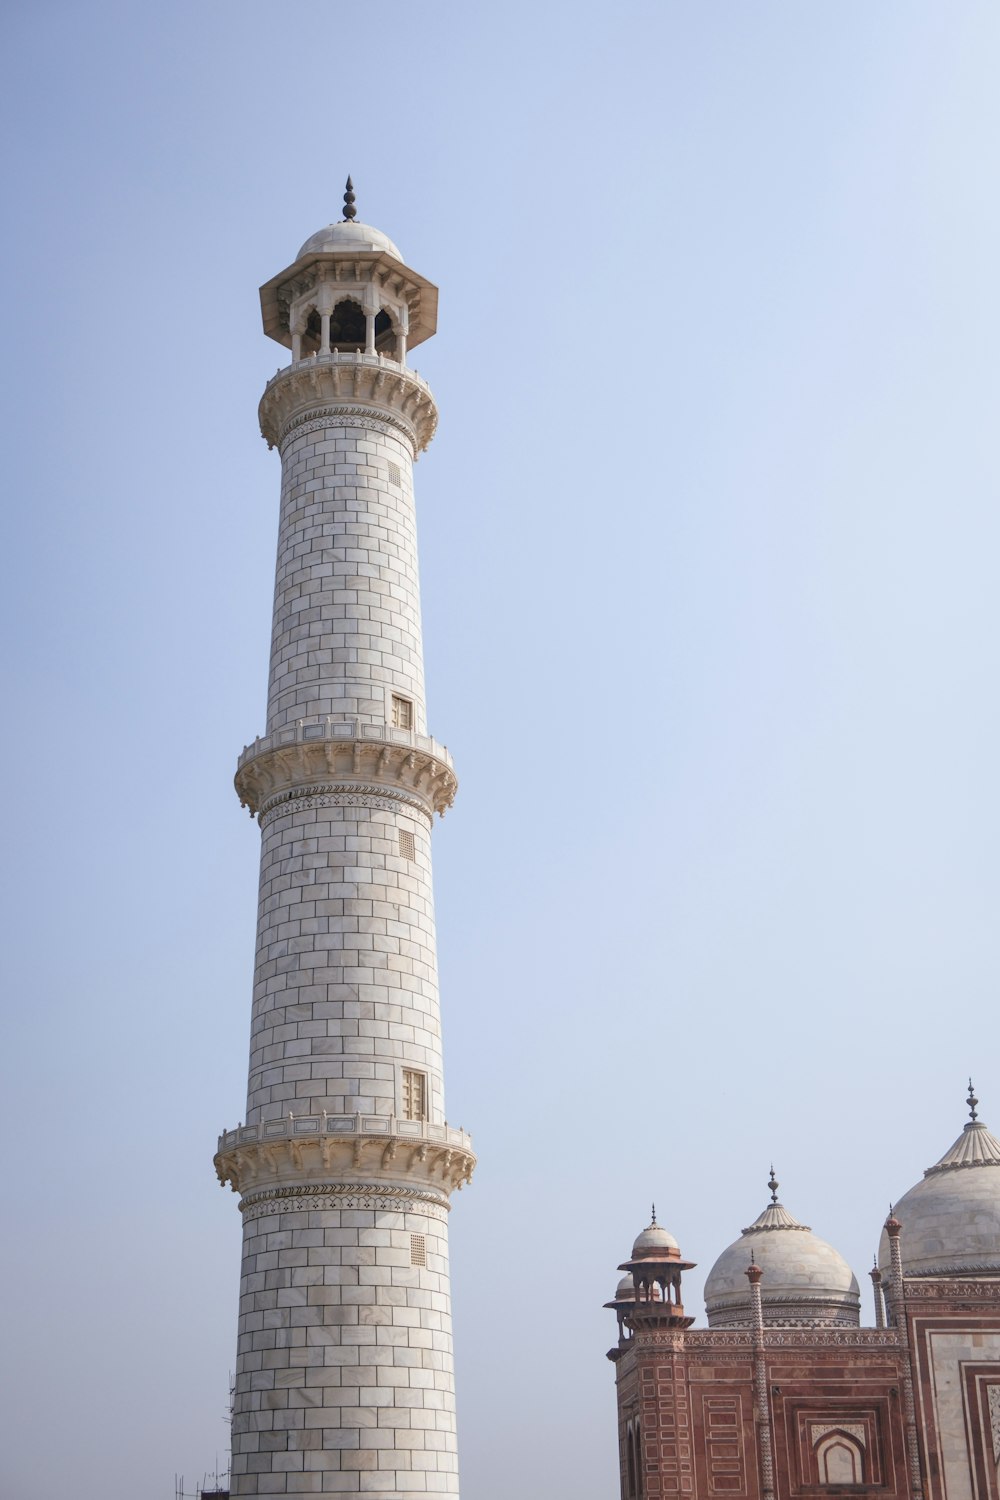 a tall white tower with a clock on top of it